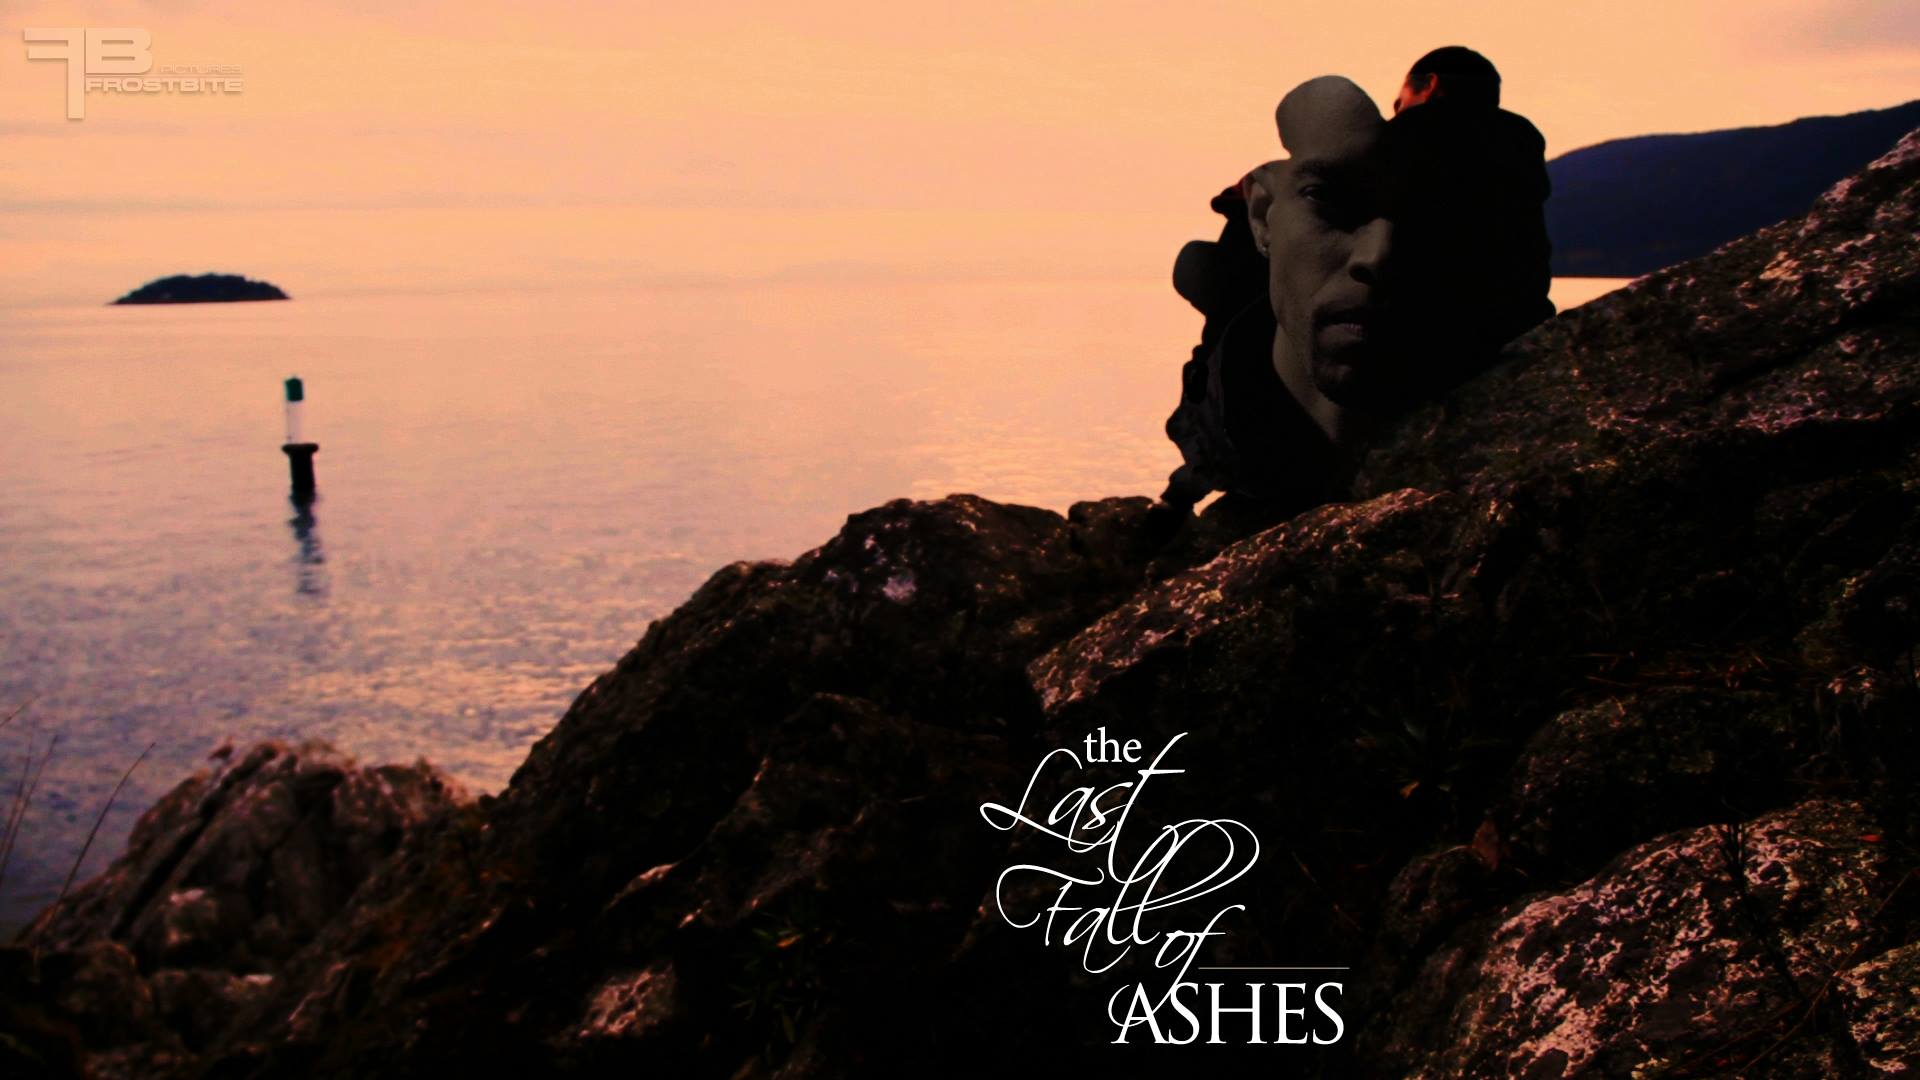 The Last Fall of Ashes